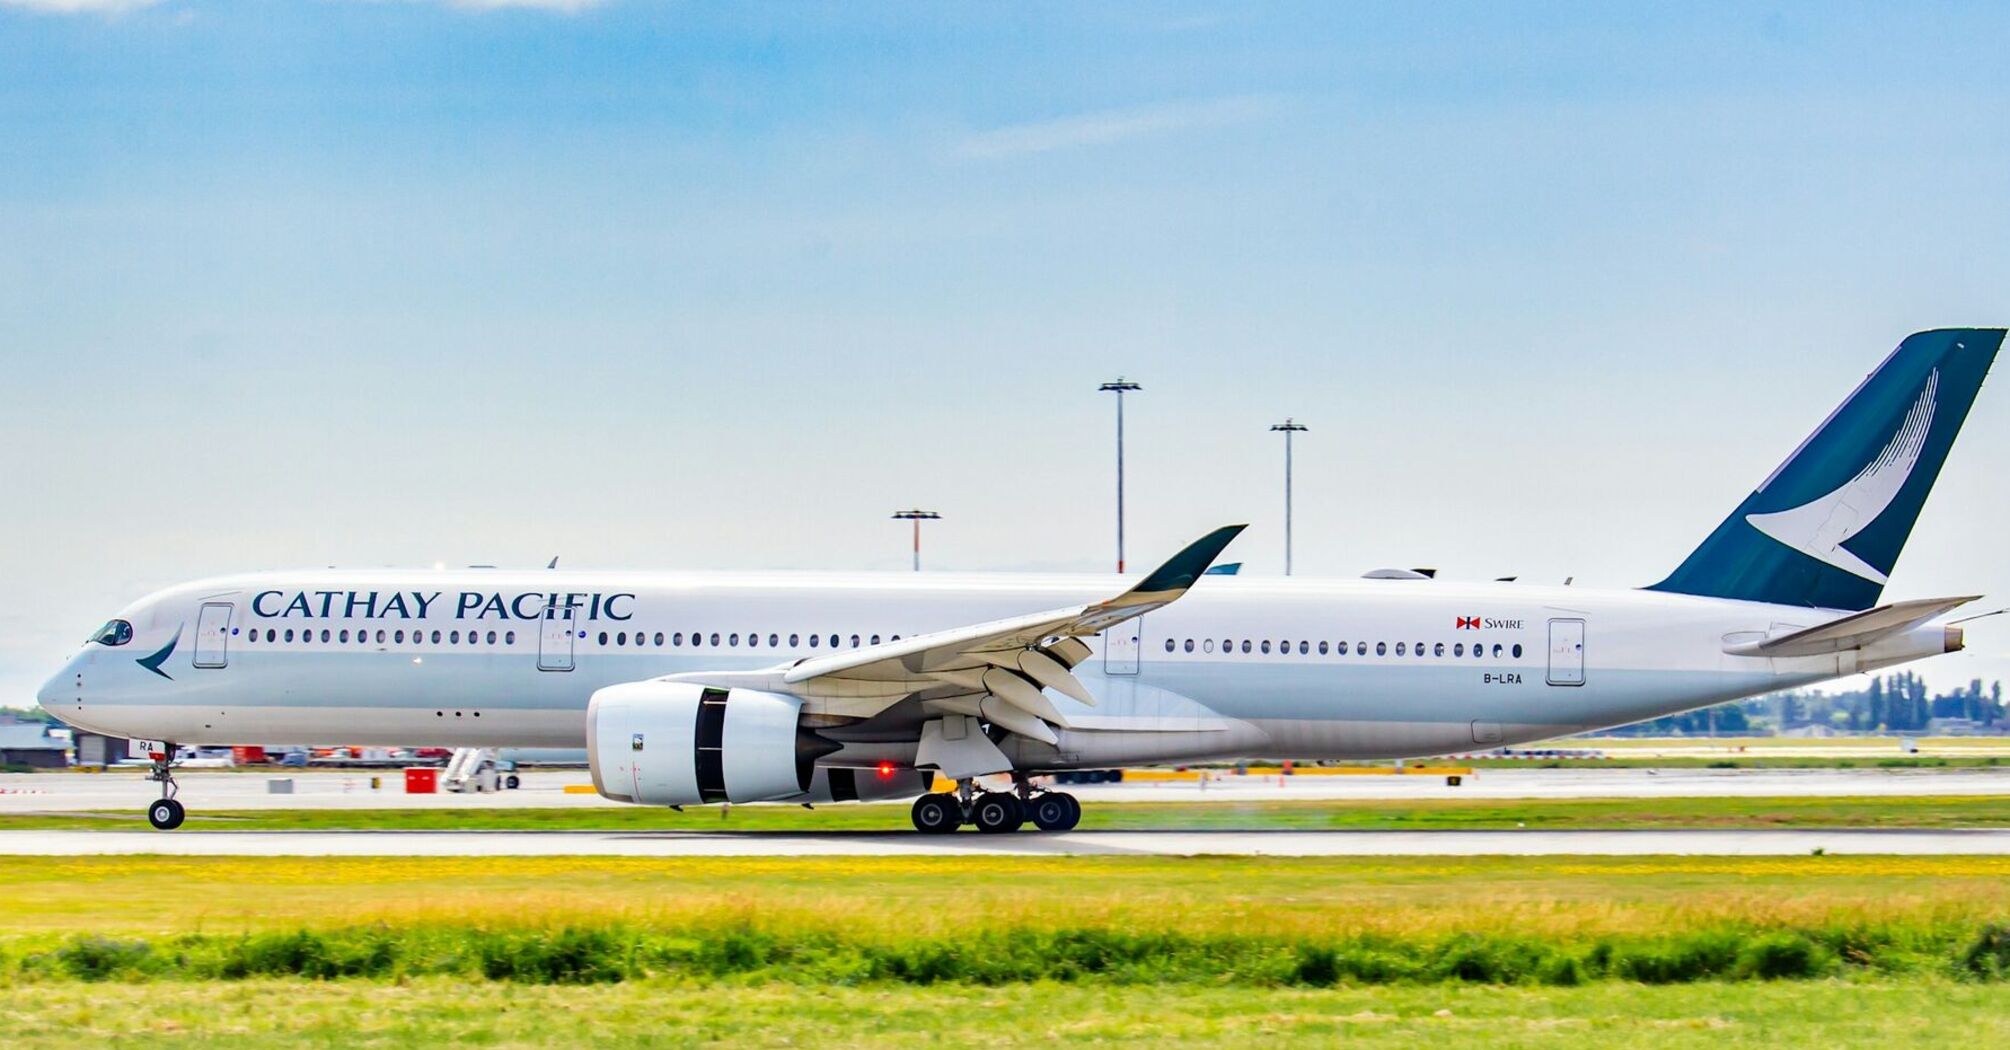 Cathay Pacific aircraft on runway in clear weather